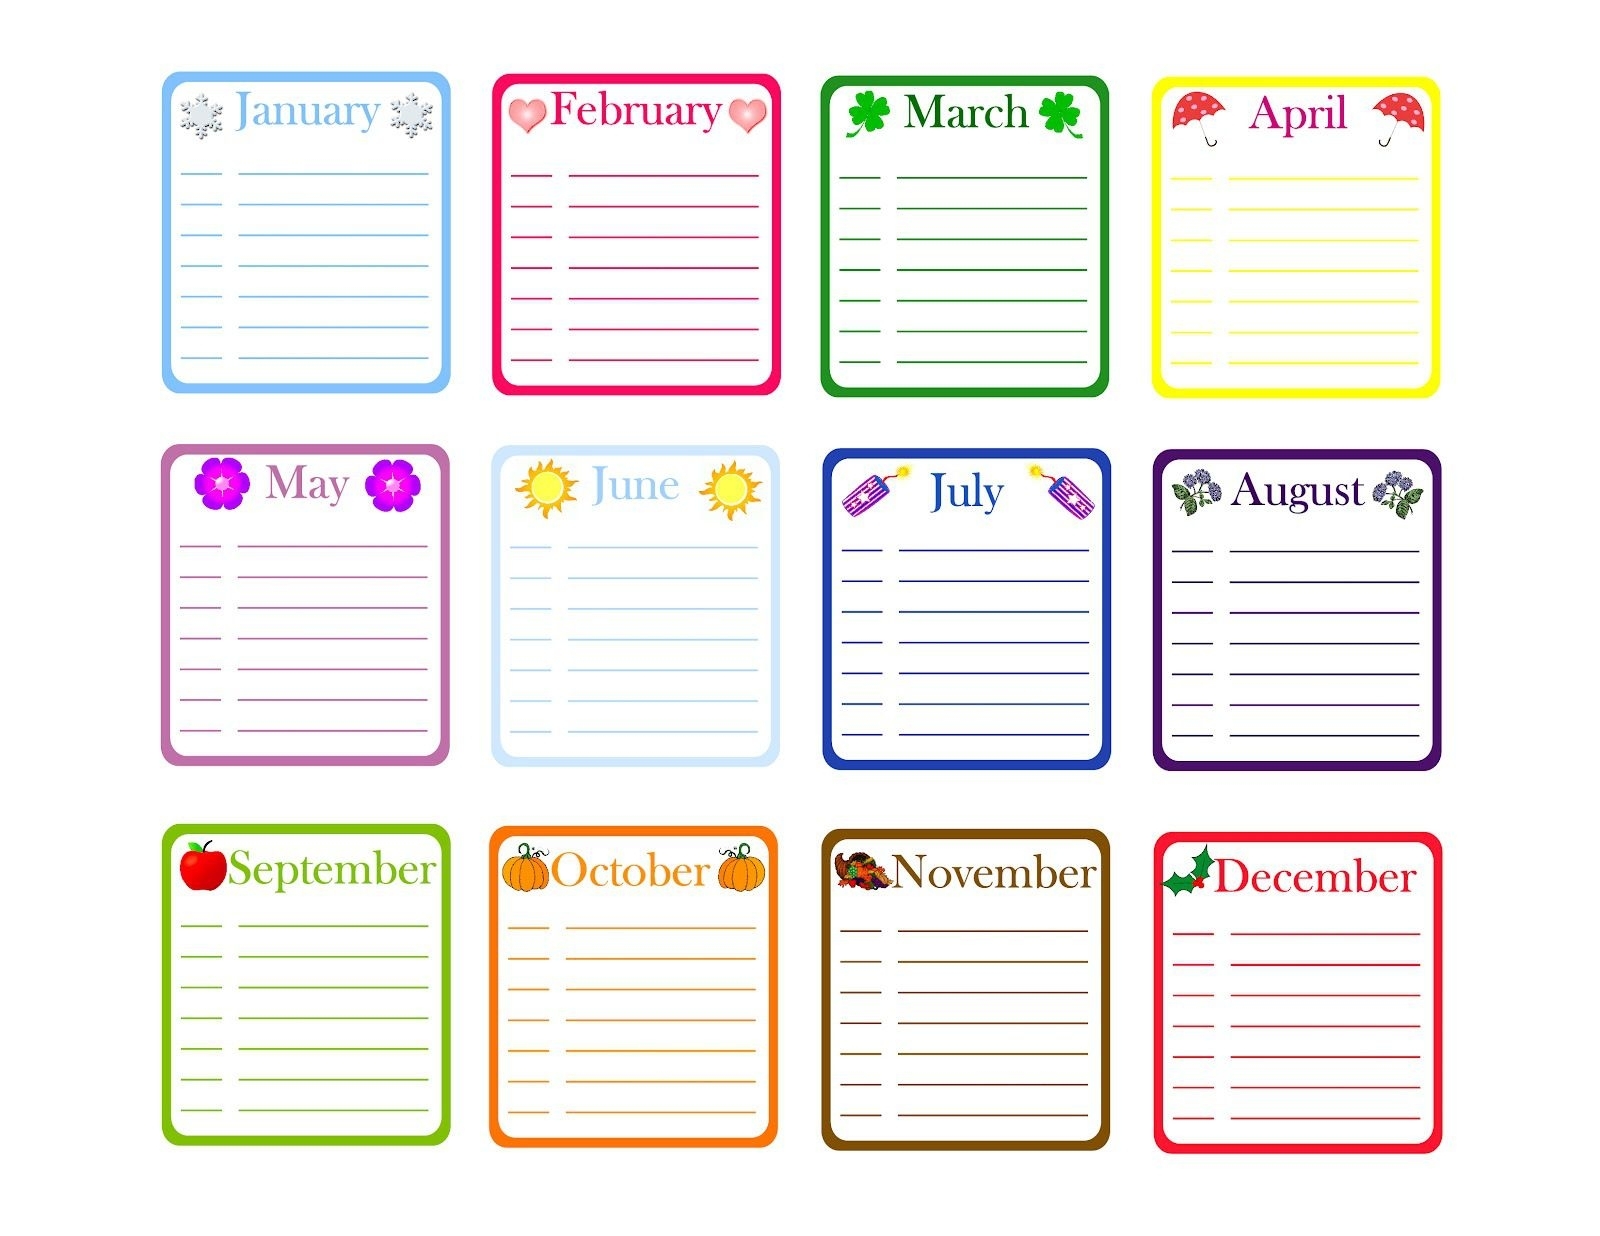 Yearly Birthday Calendar Template. Free Classroom Printables for Blank Calendar Chart For Classrooms